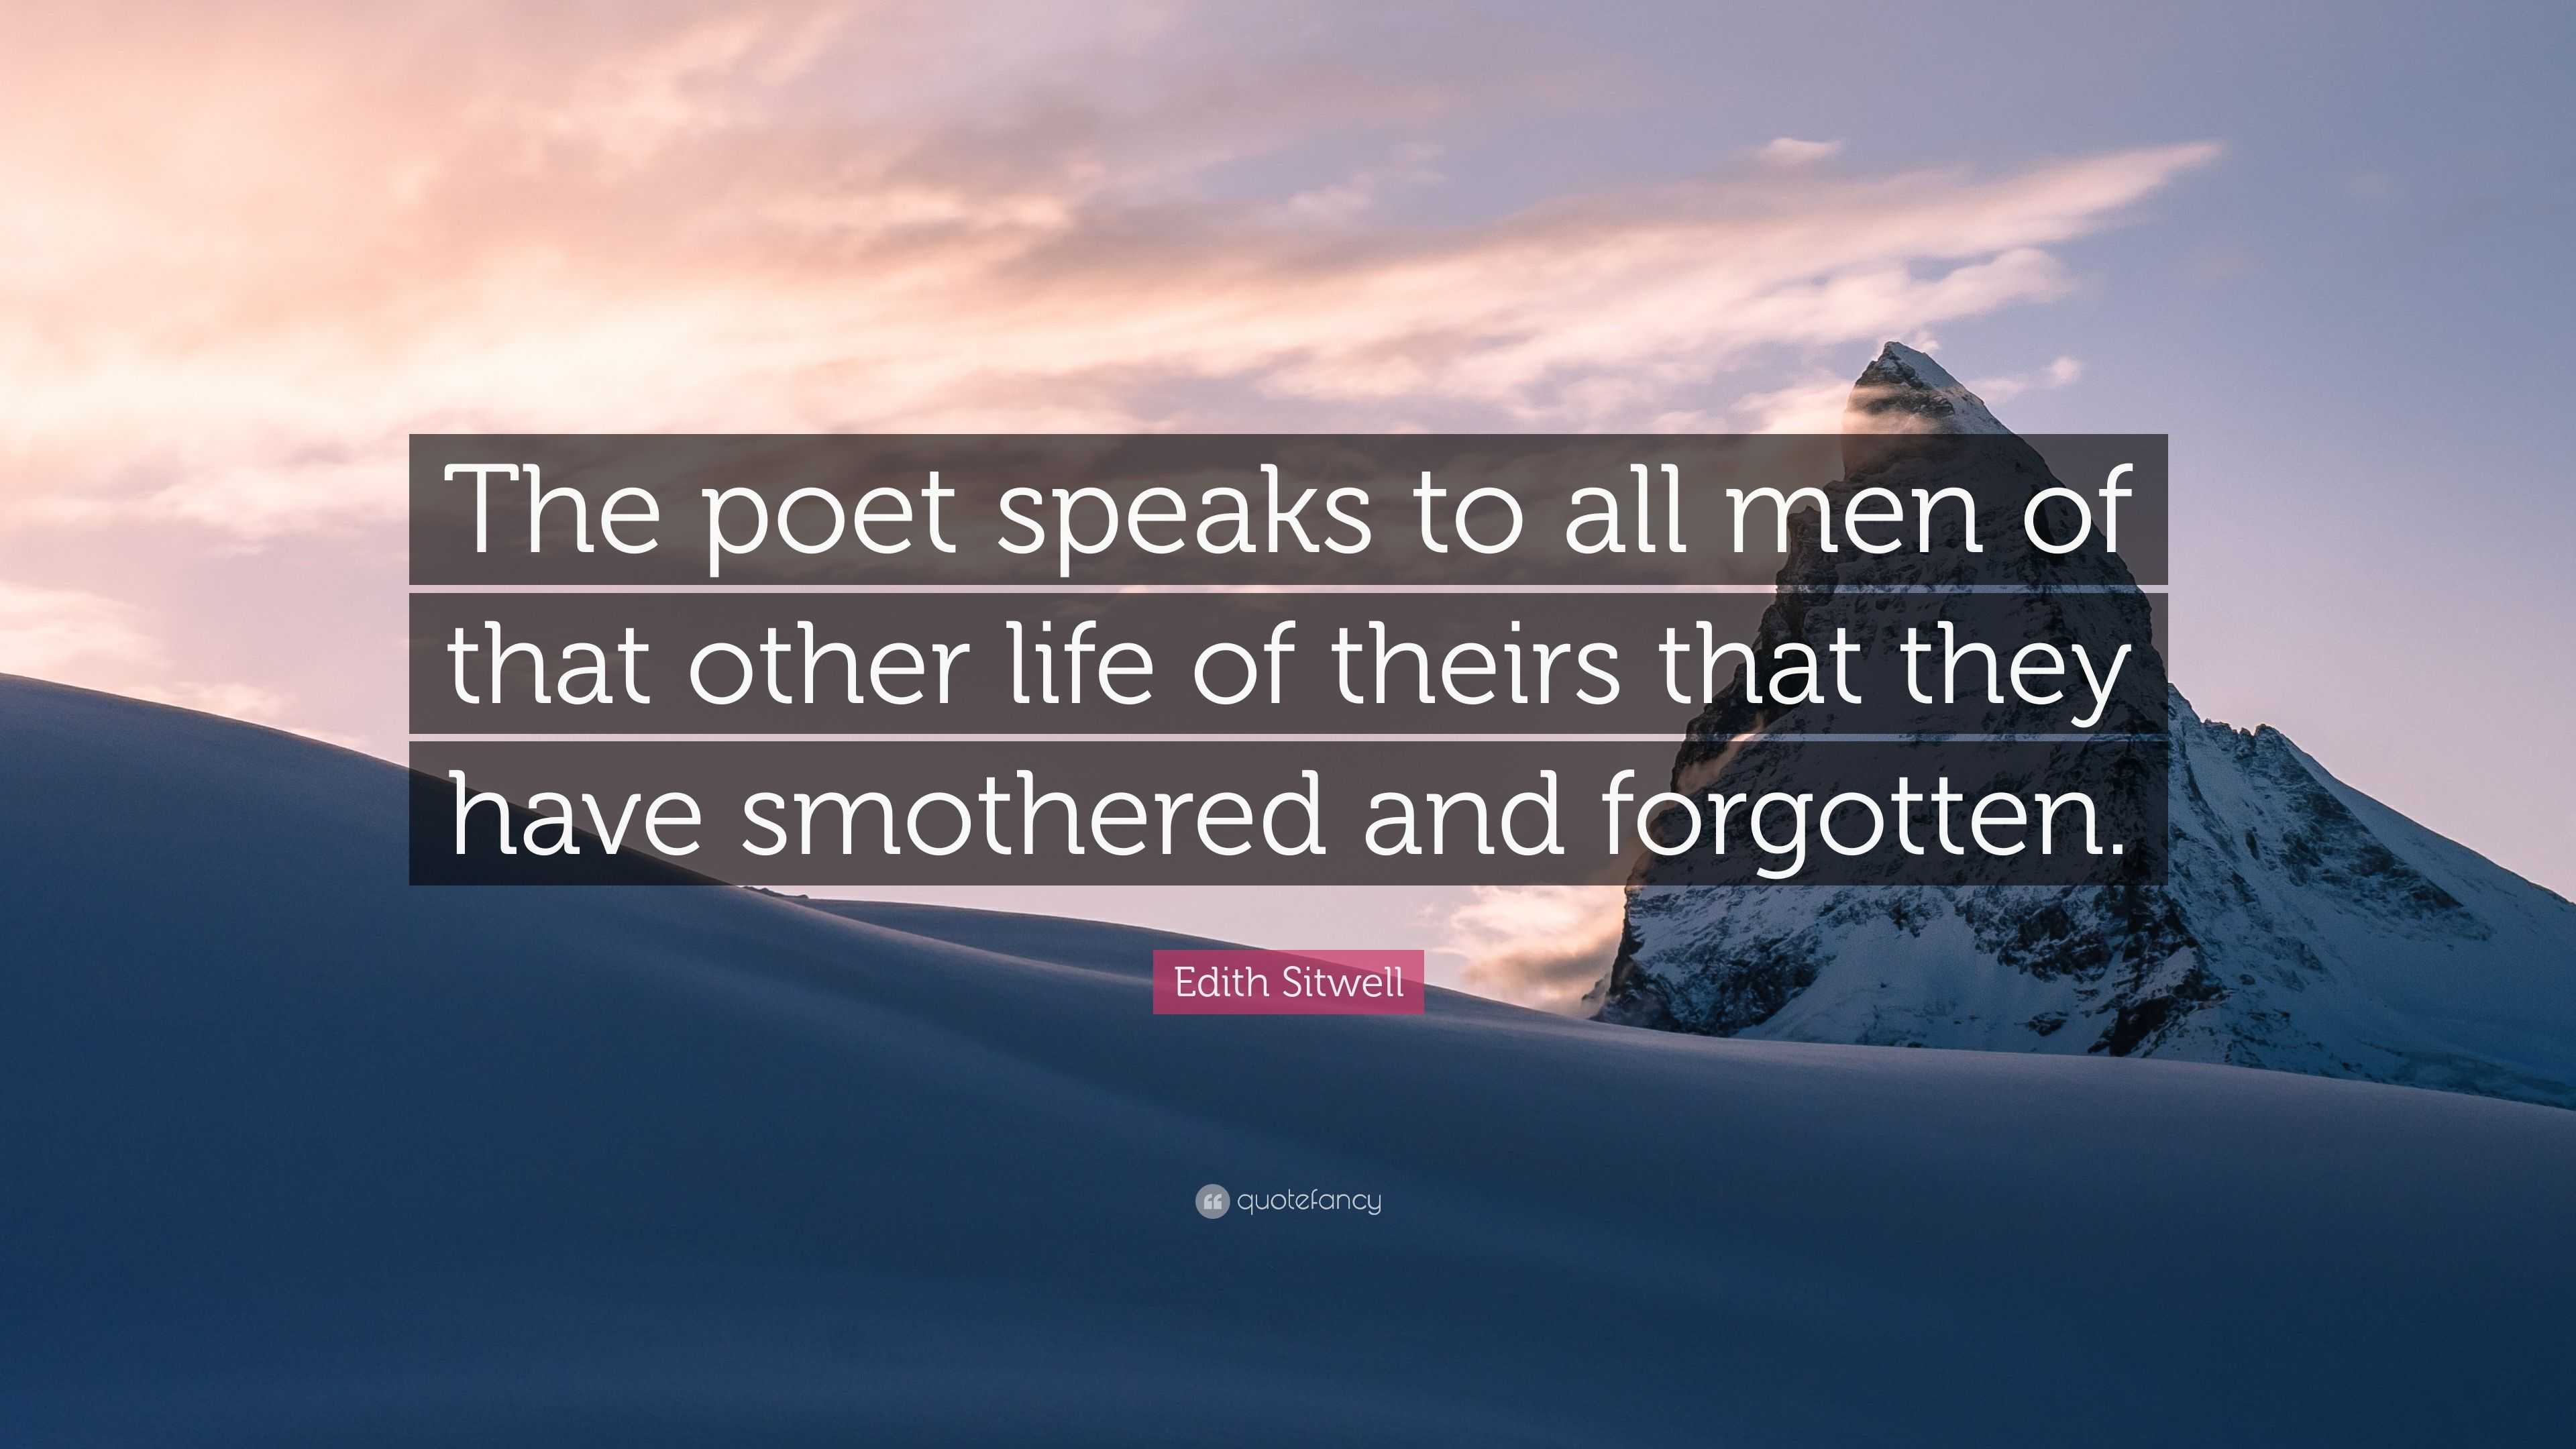 Edith Sitwell Quote: “The poet speaks to all men of that other life of